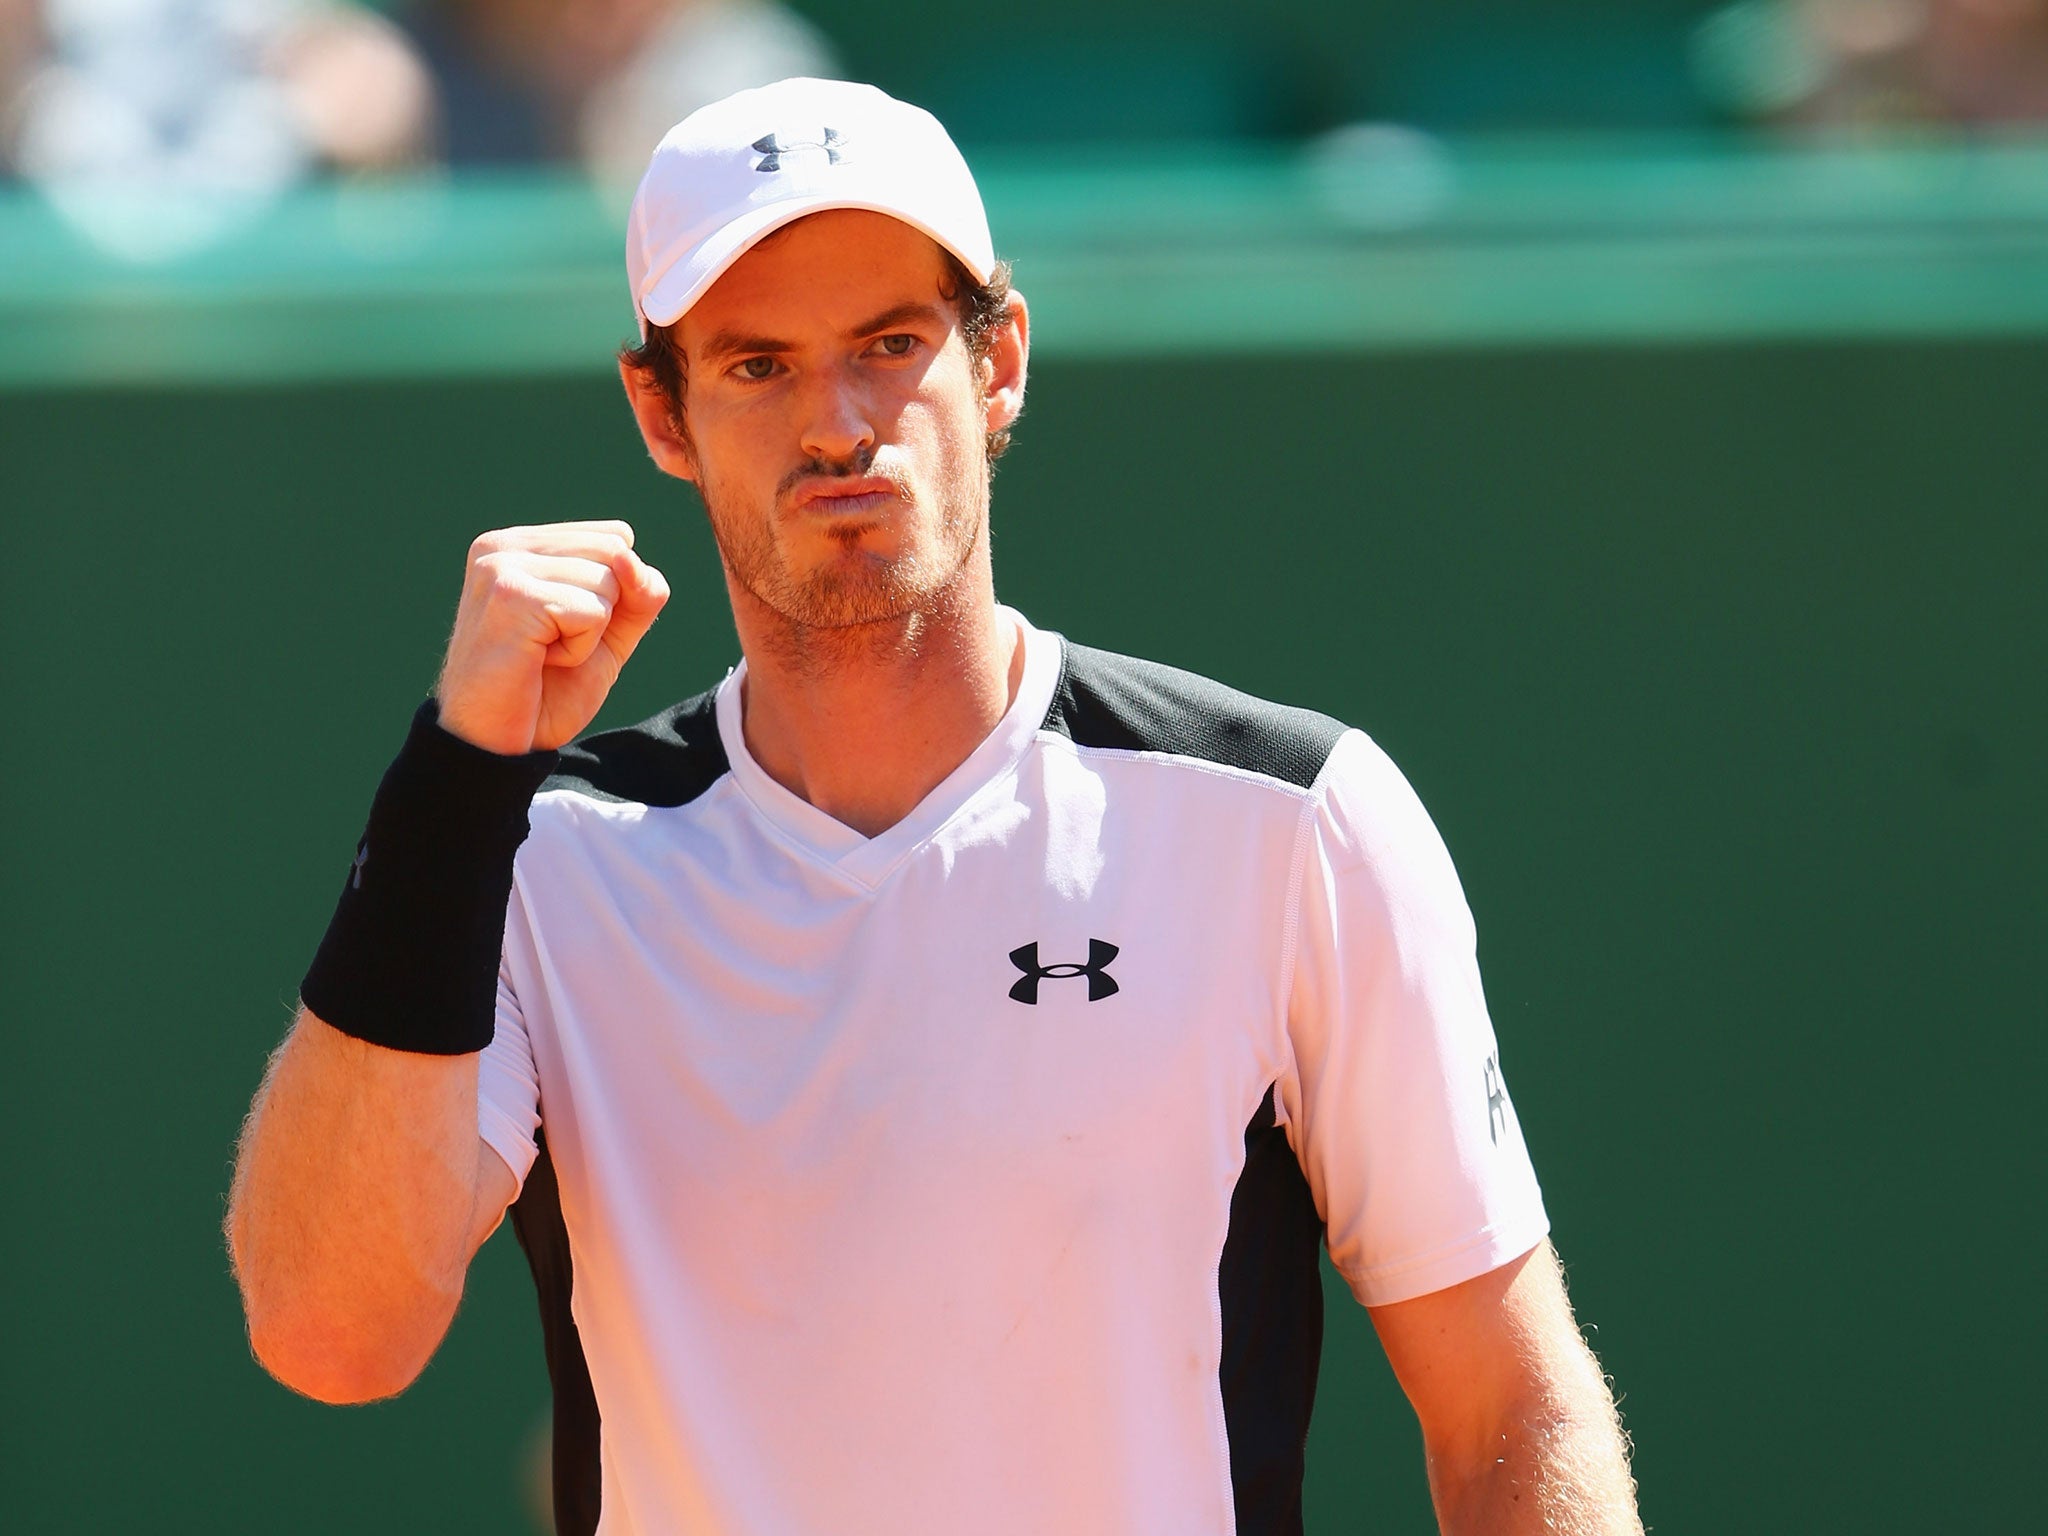 Andy Murray faces Rafa Nadal in MonteCarlo Masters semifinal after